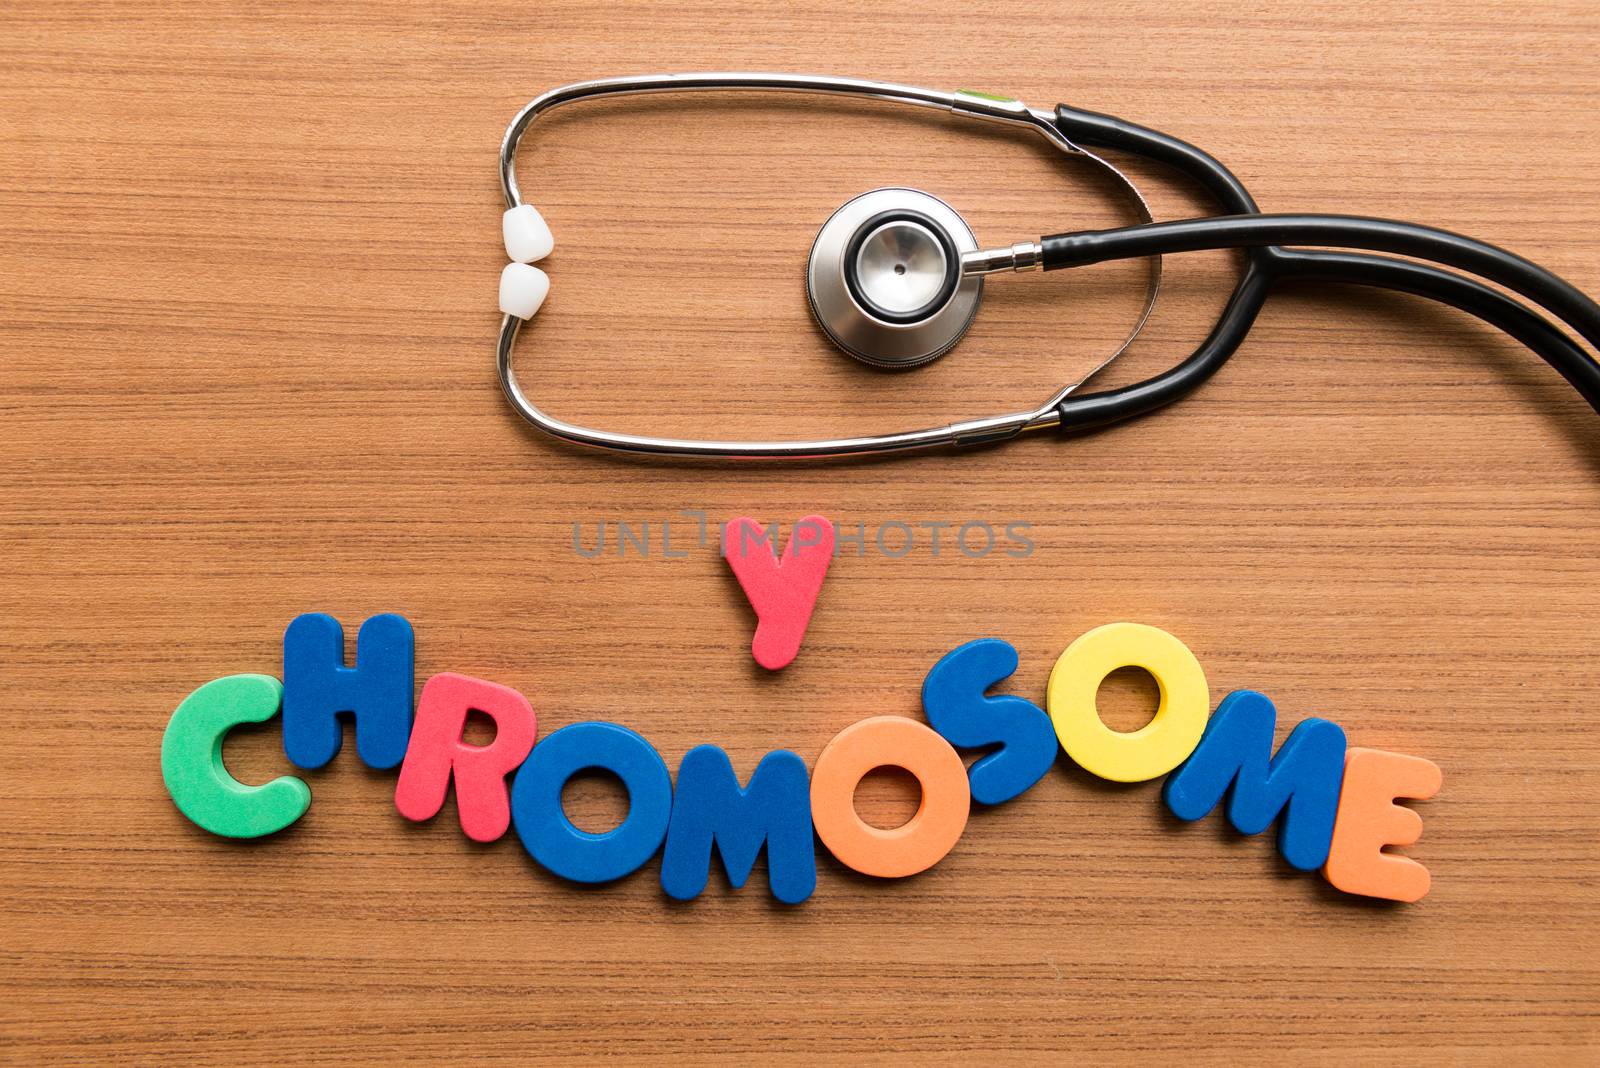 y chromosome colorful word with stethoscope by sohel.parvez@hotmail.com